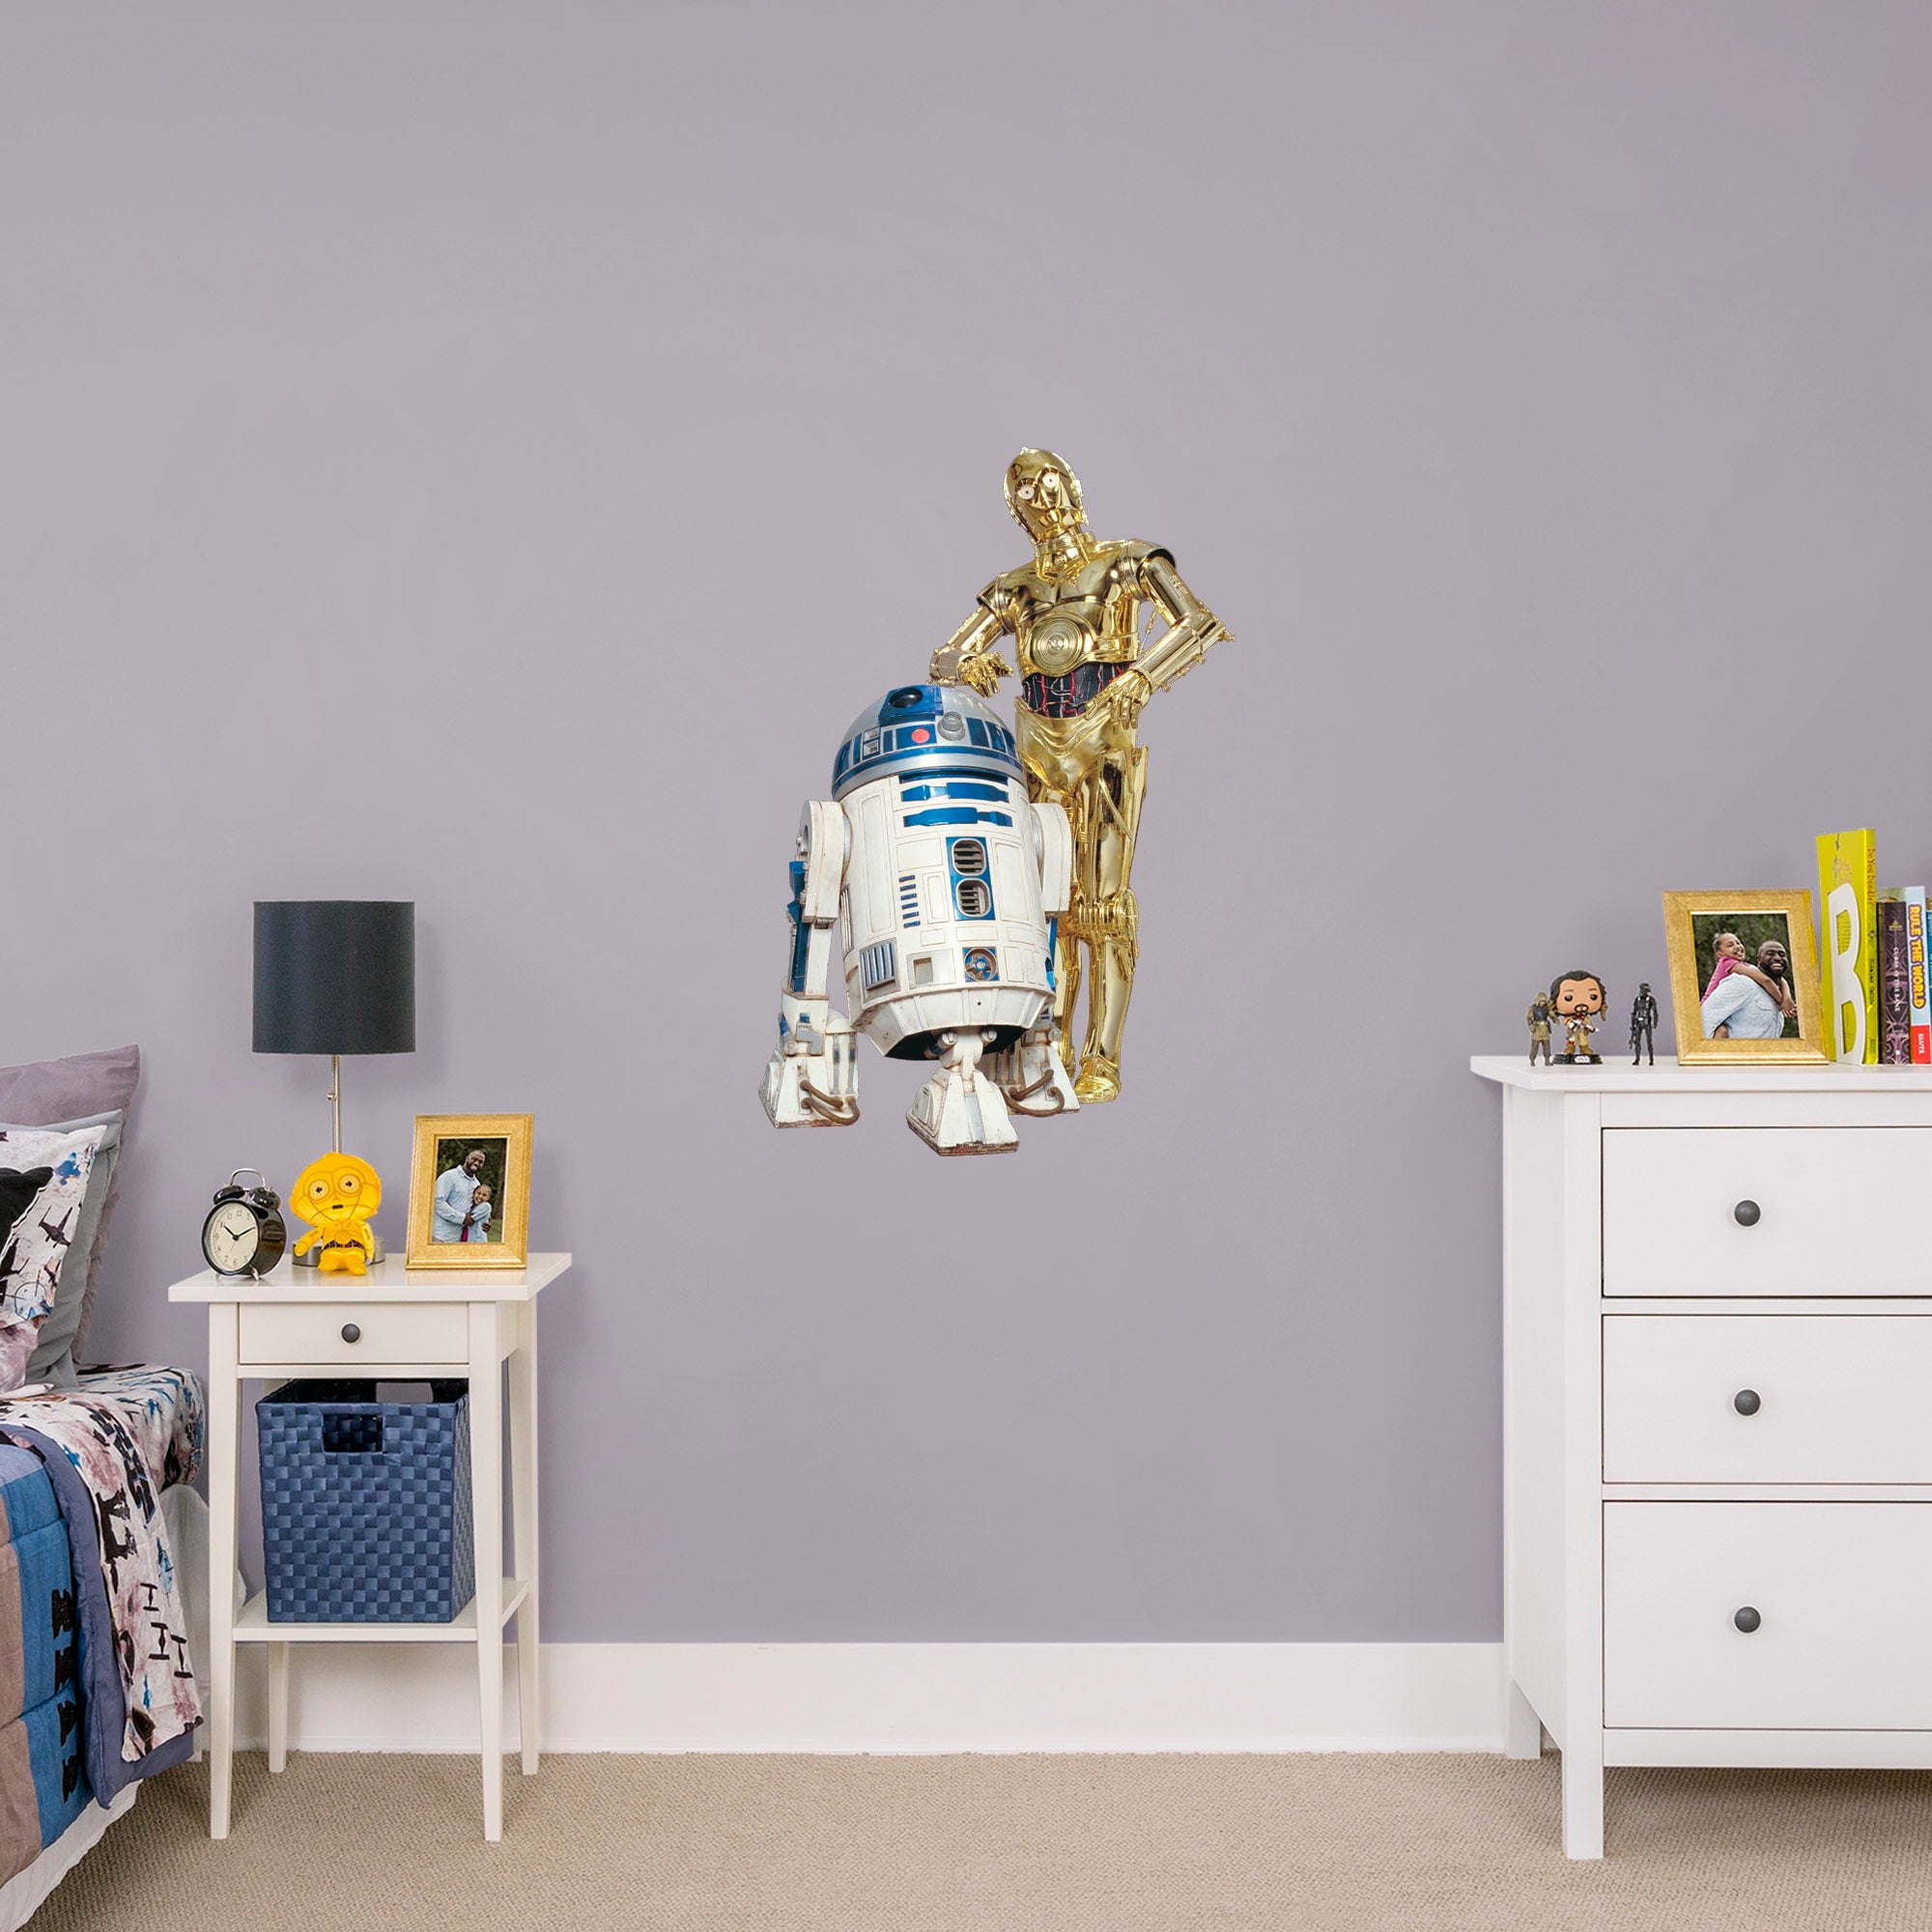 C-3PO & R2-D2 - Officially Licensed Removable Wall Decal XL by Fathead | Vinyl